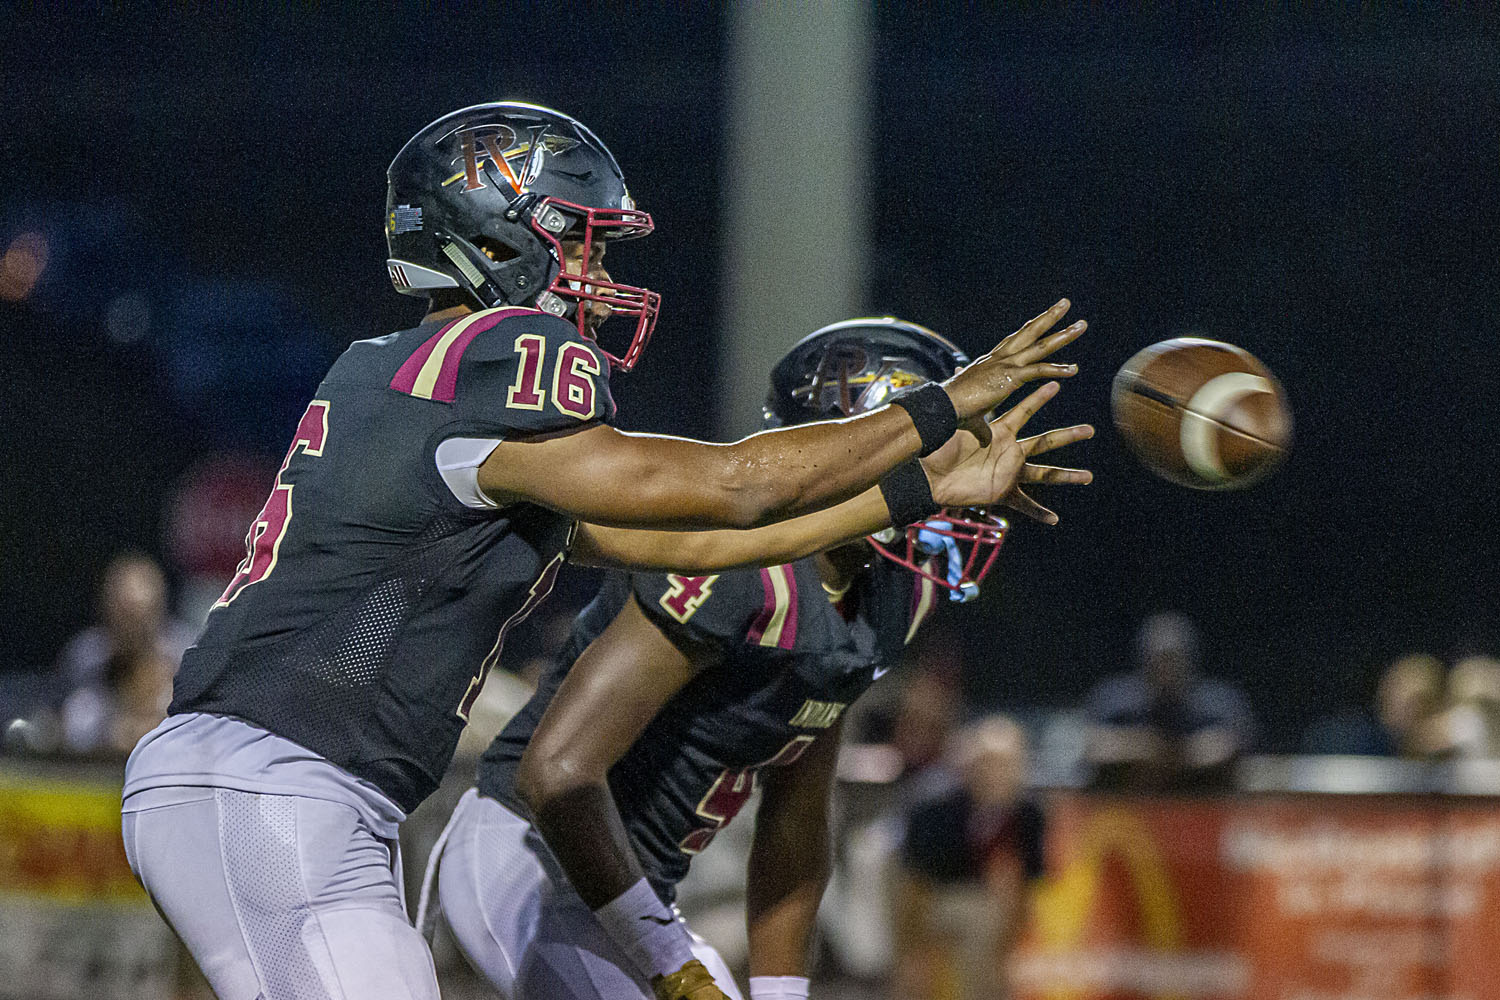 Pinson Valley now one step closer to 3-peat after downing undefeated Muscle Shoals